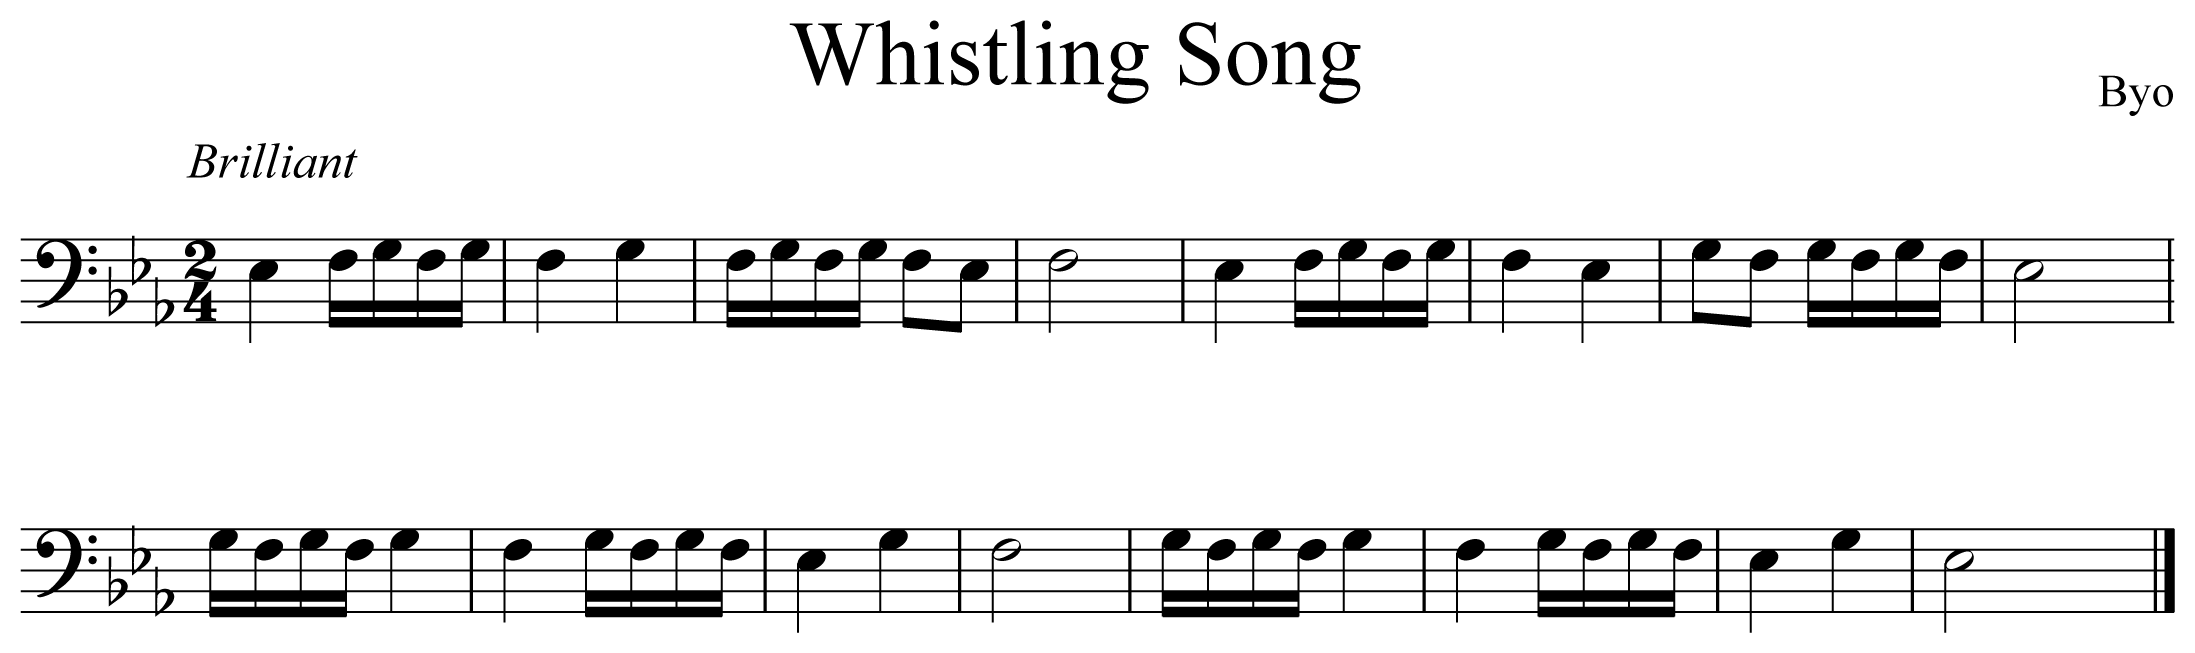 Whistling Song Music Notation Euphonium